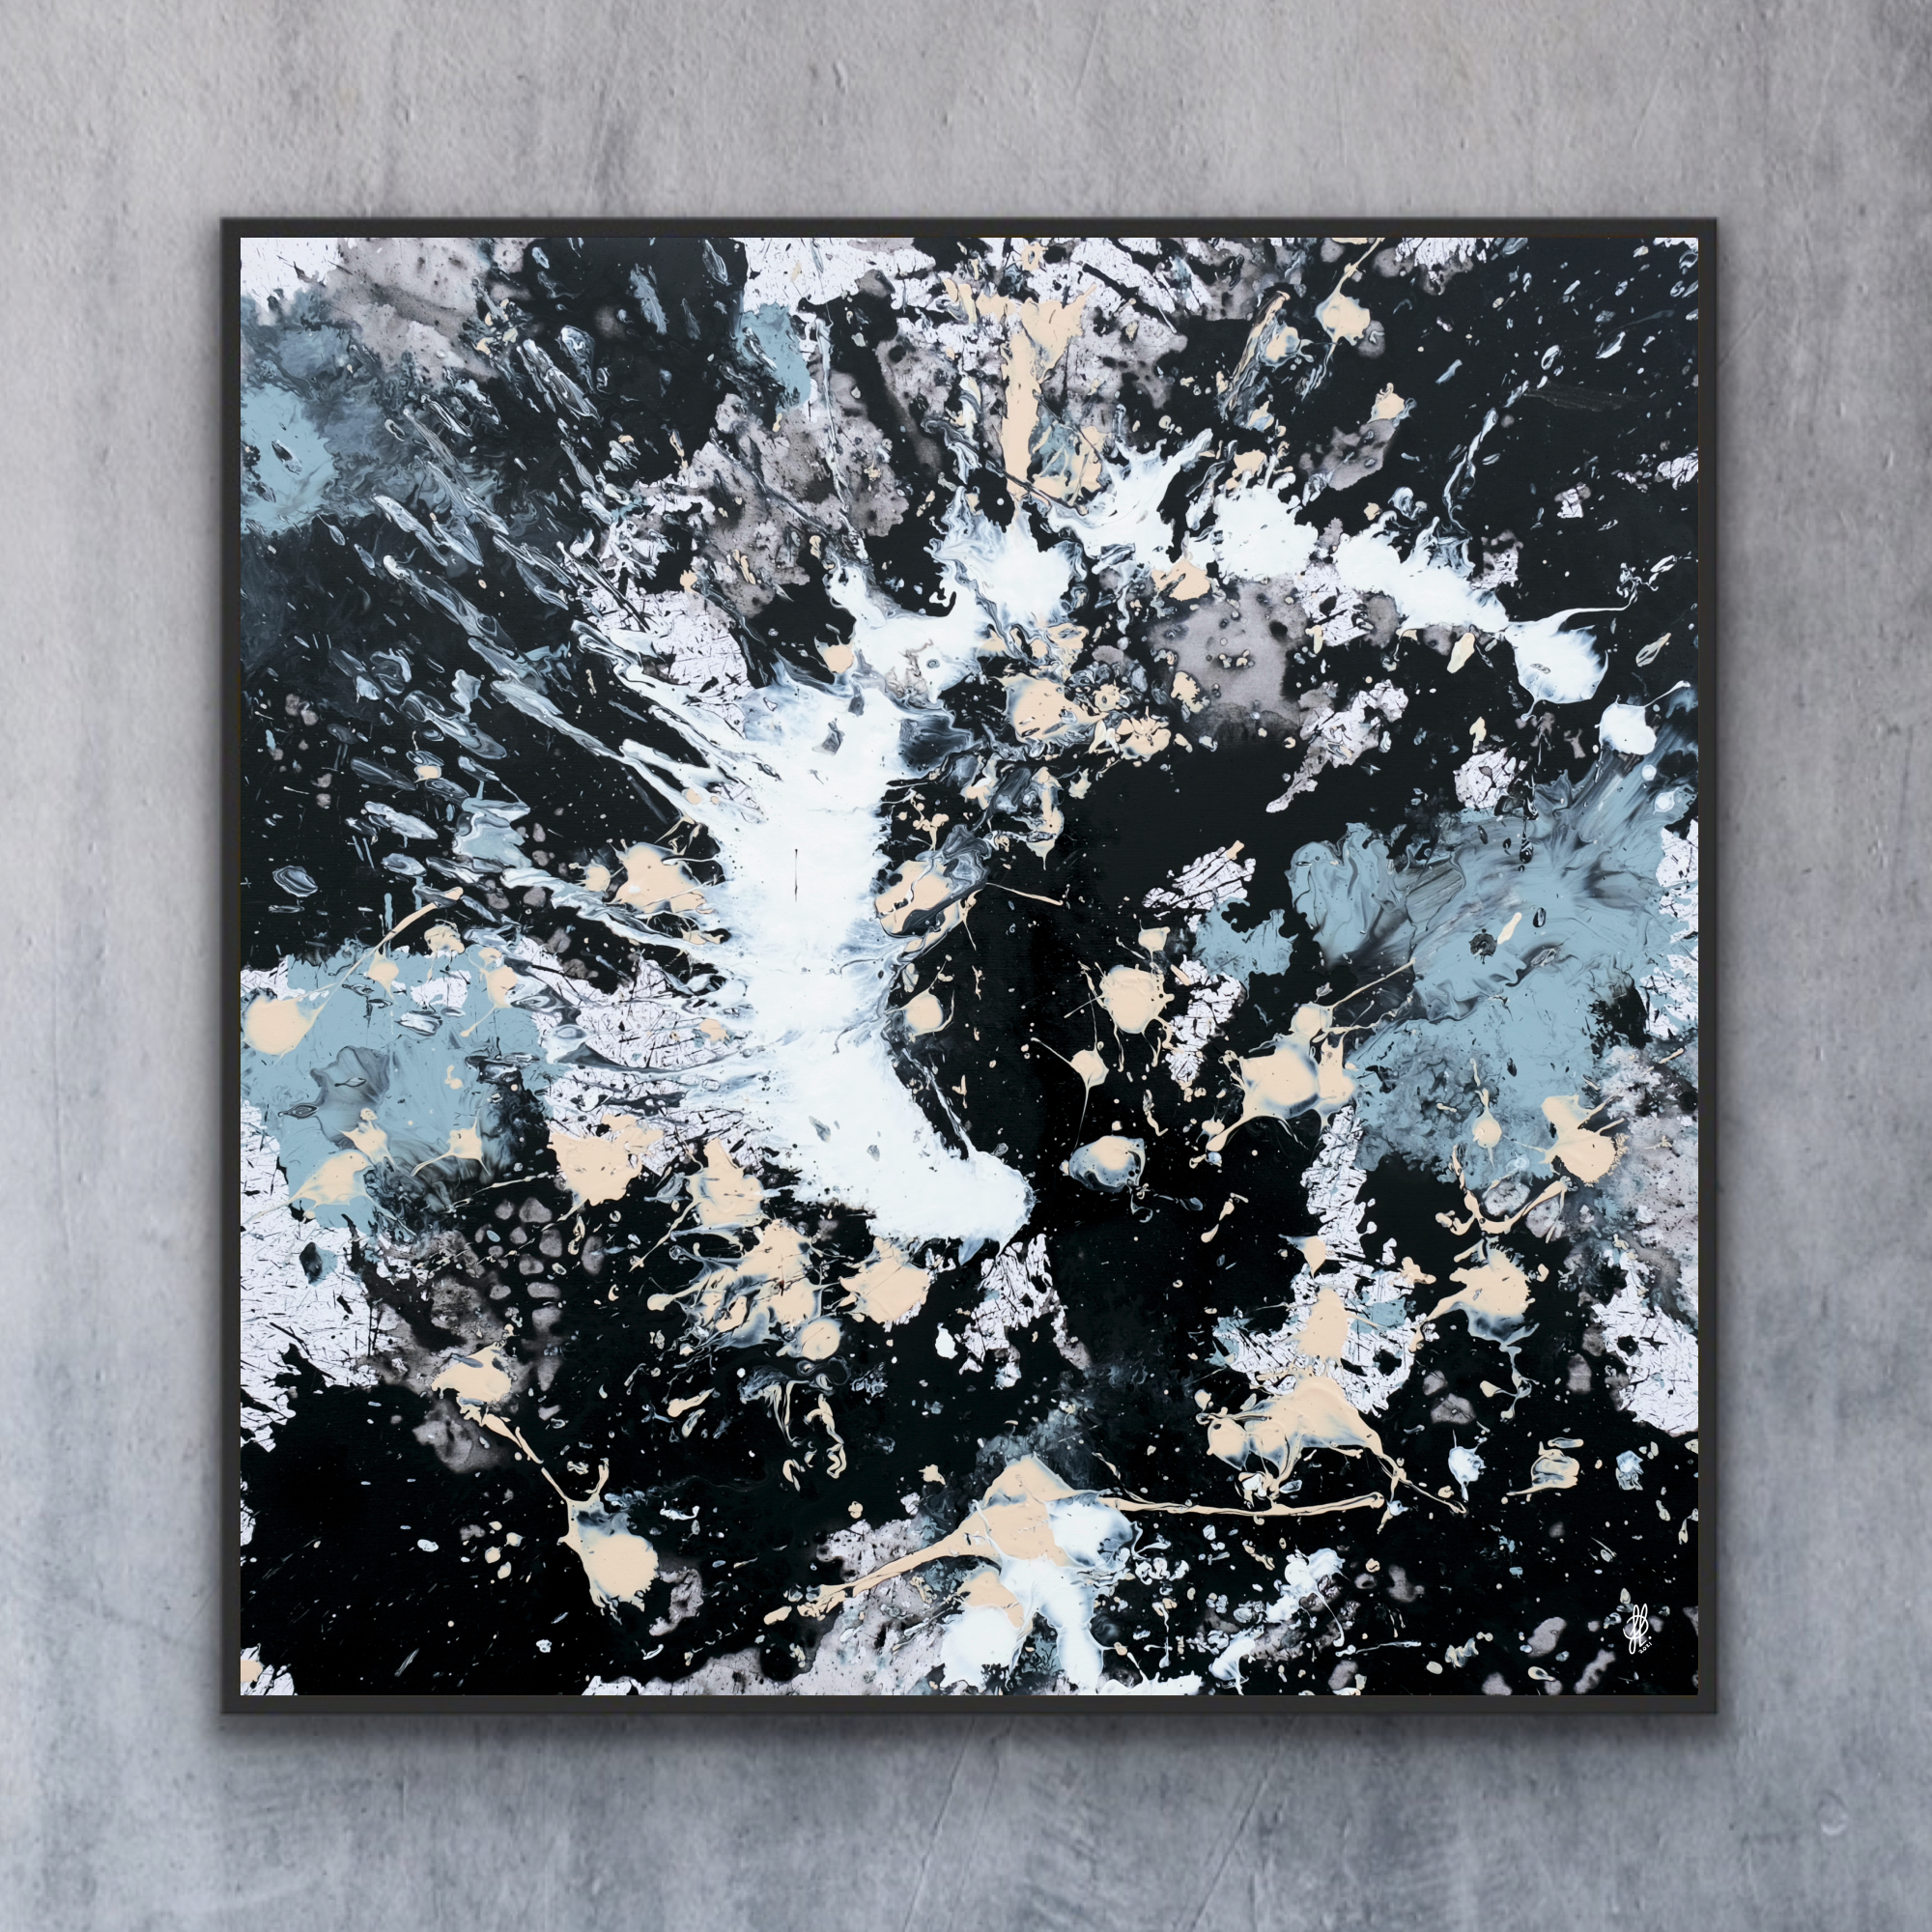 Canvas print: "Chaos In My Mind #7"